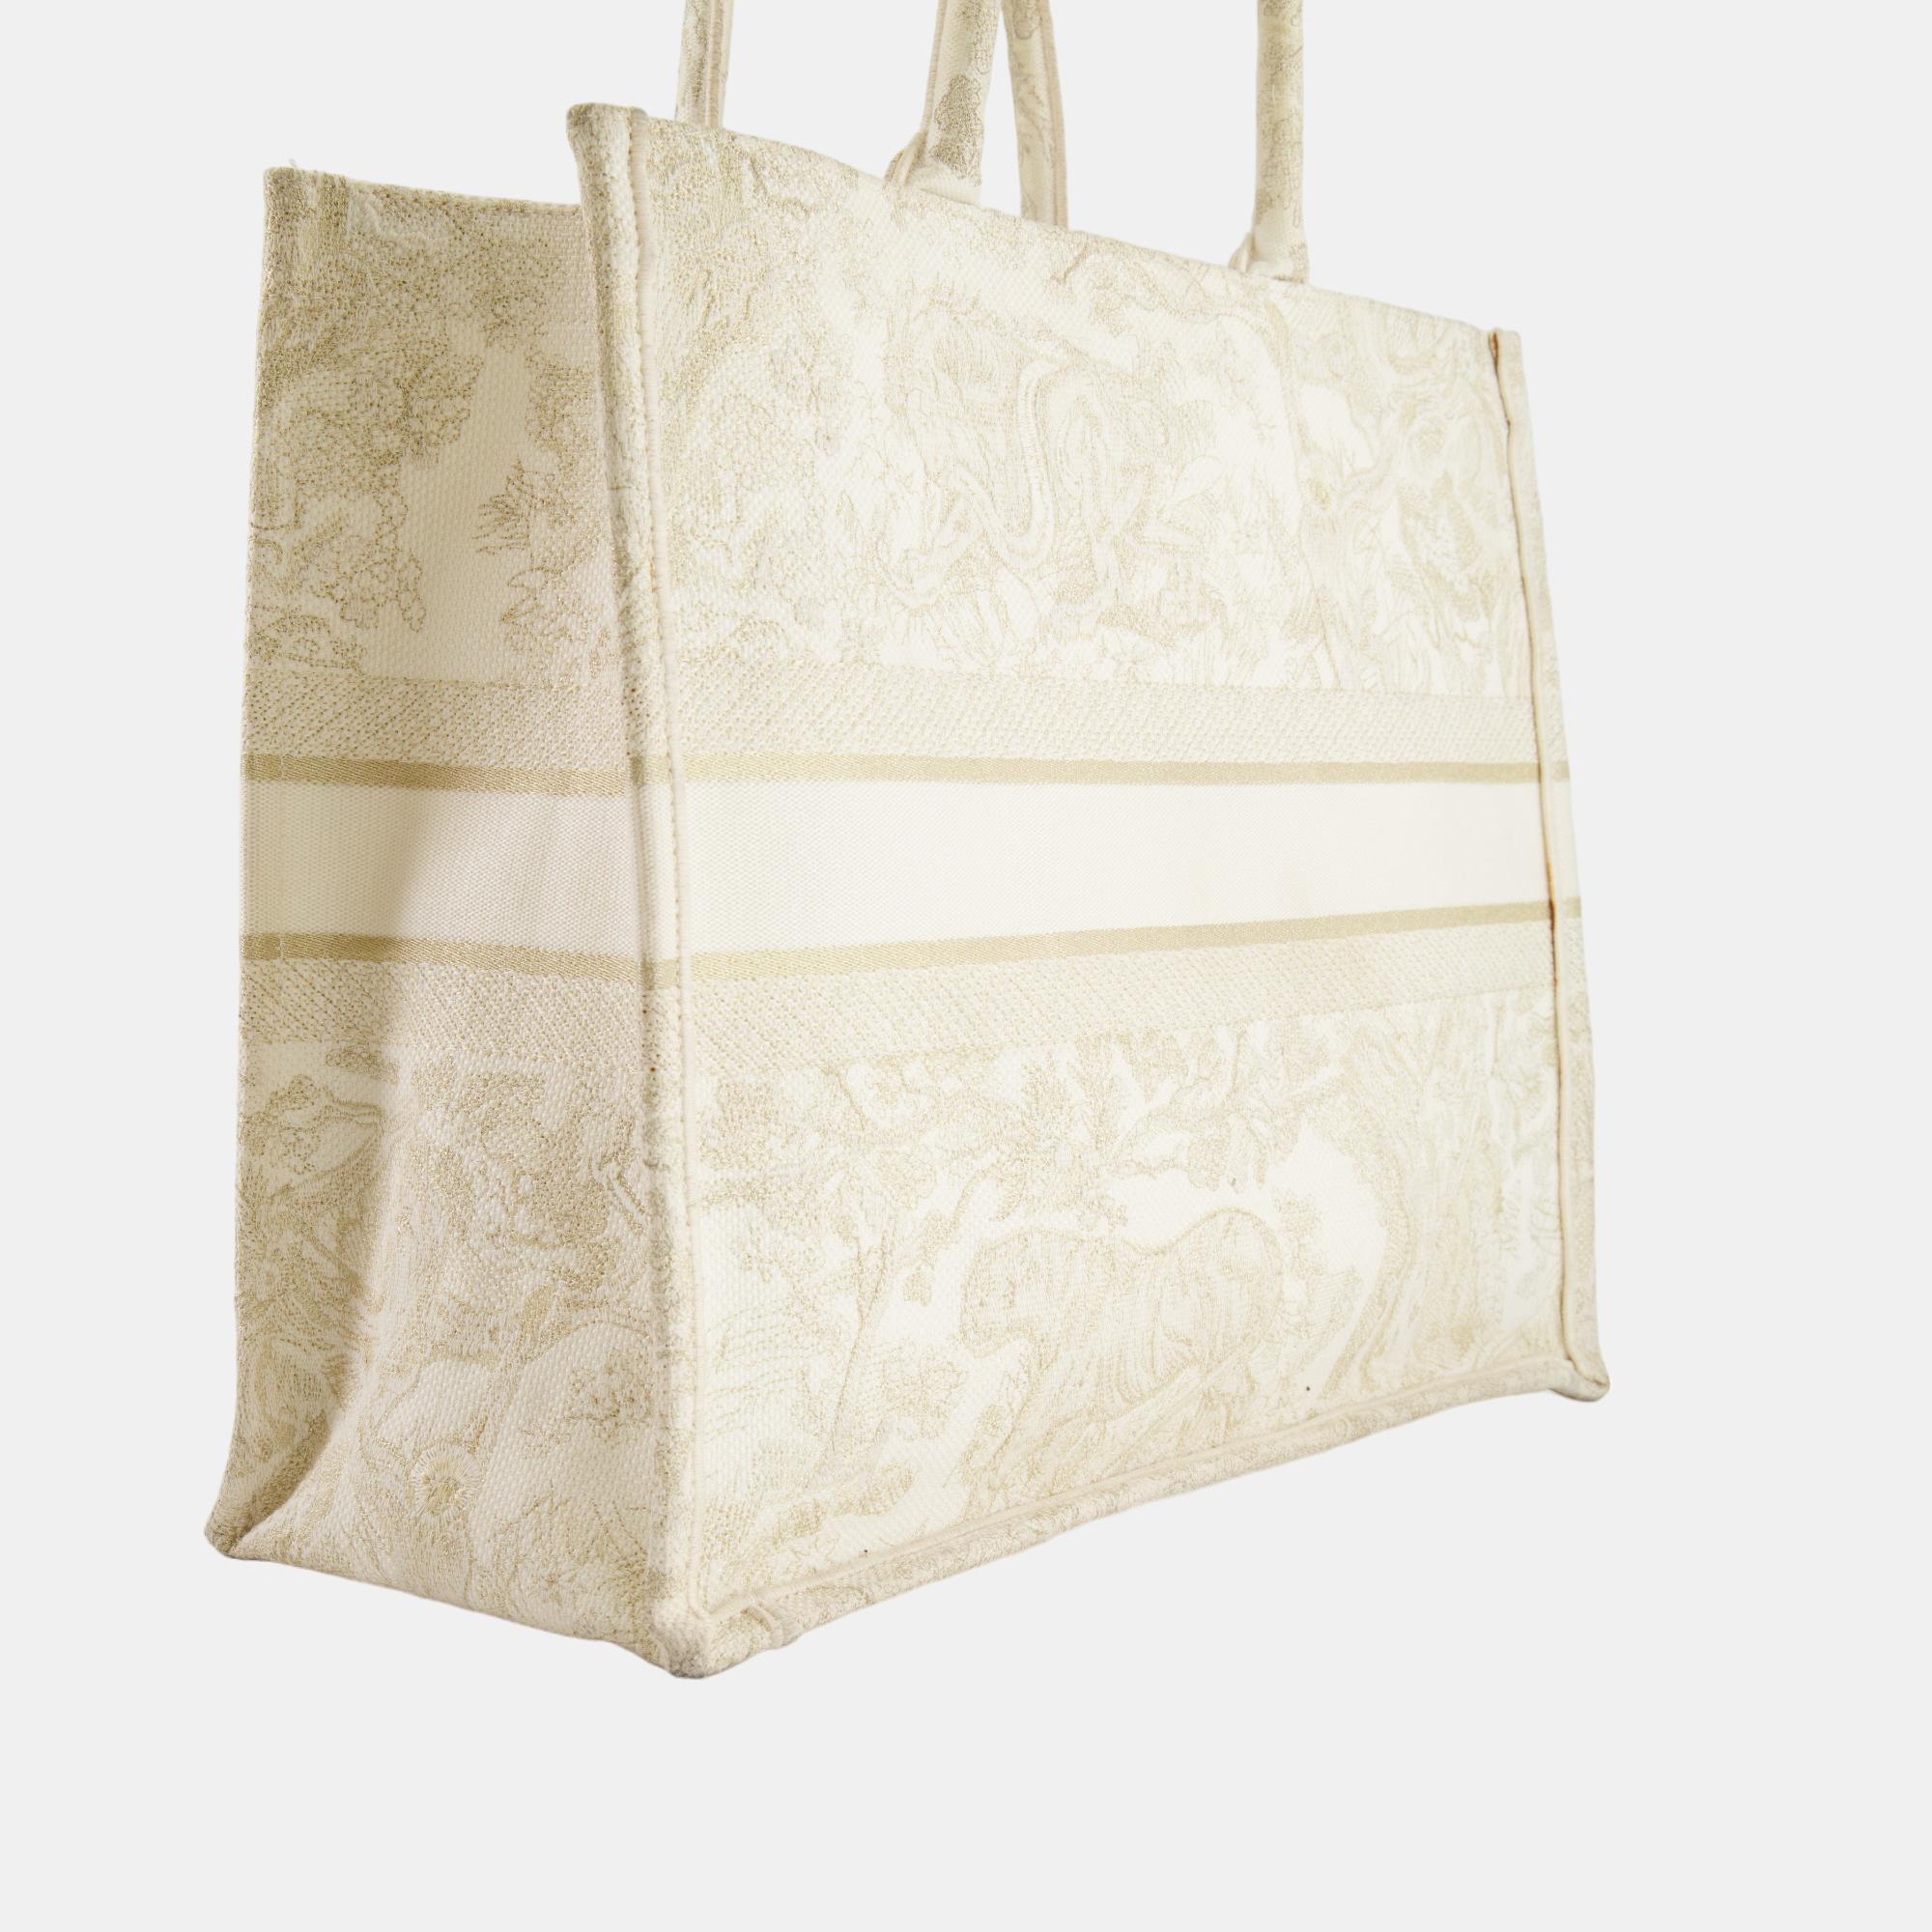 Christian Dior Cream And Gold Embroidered Large Book Tote Bag